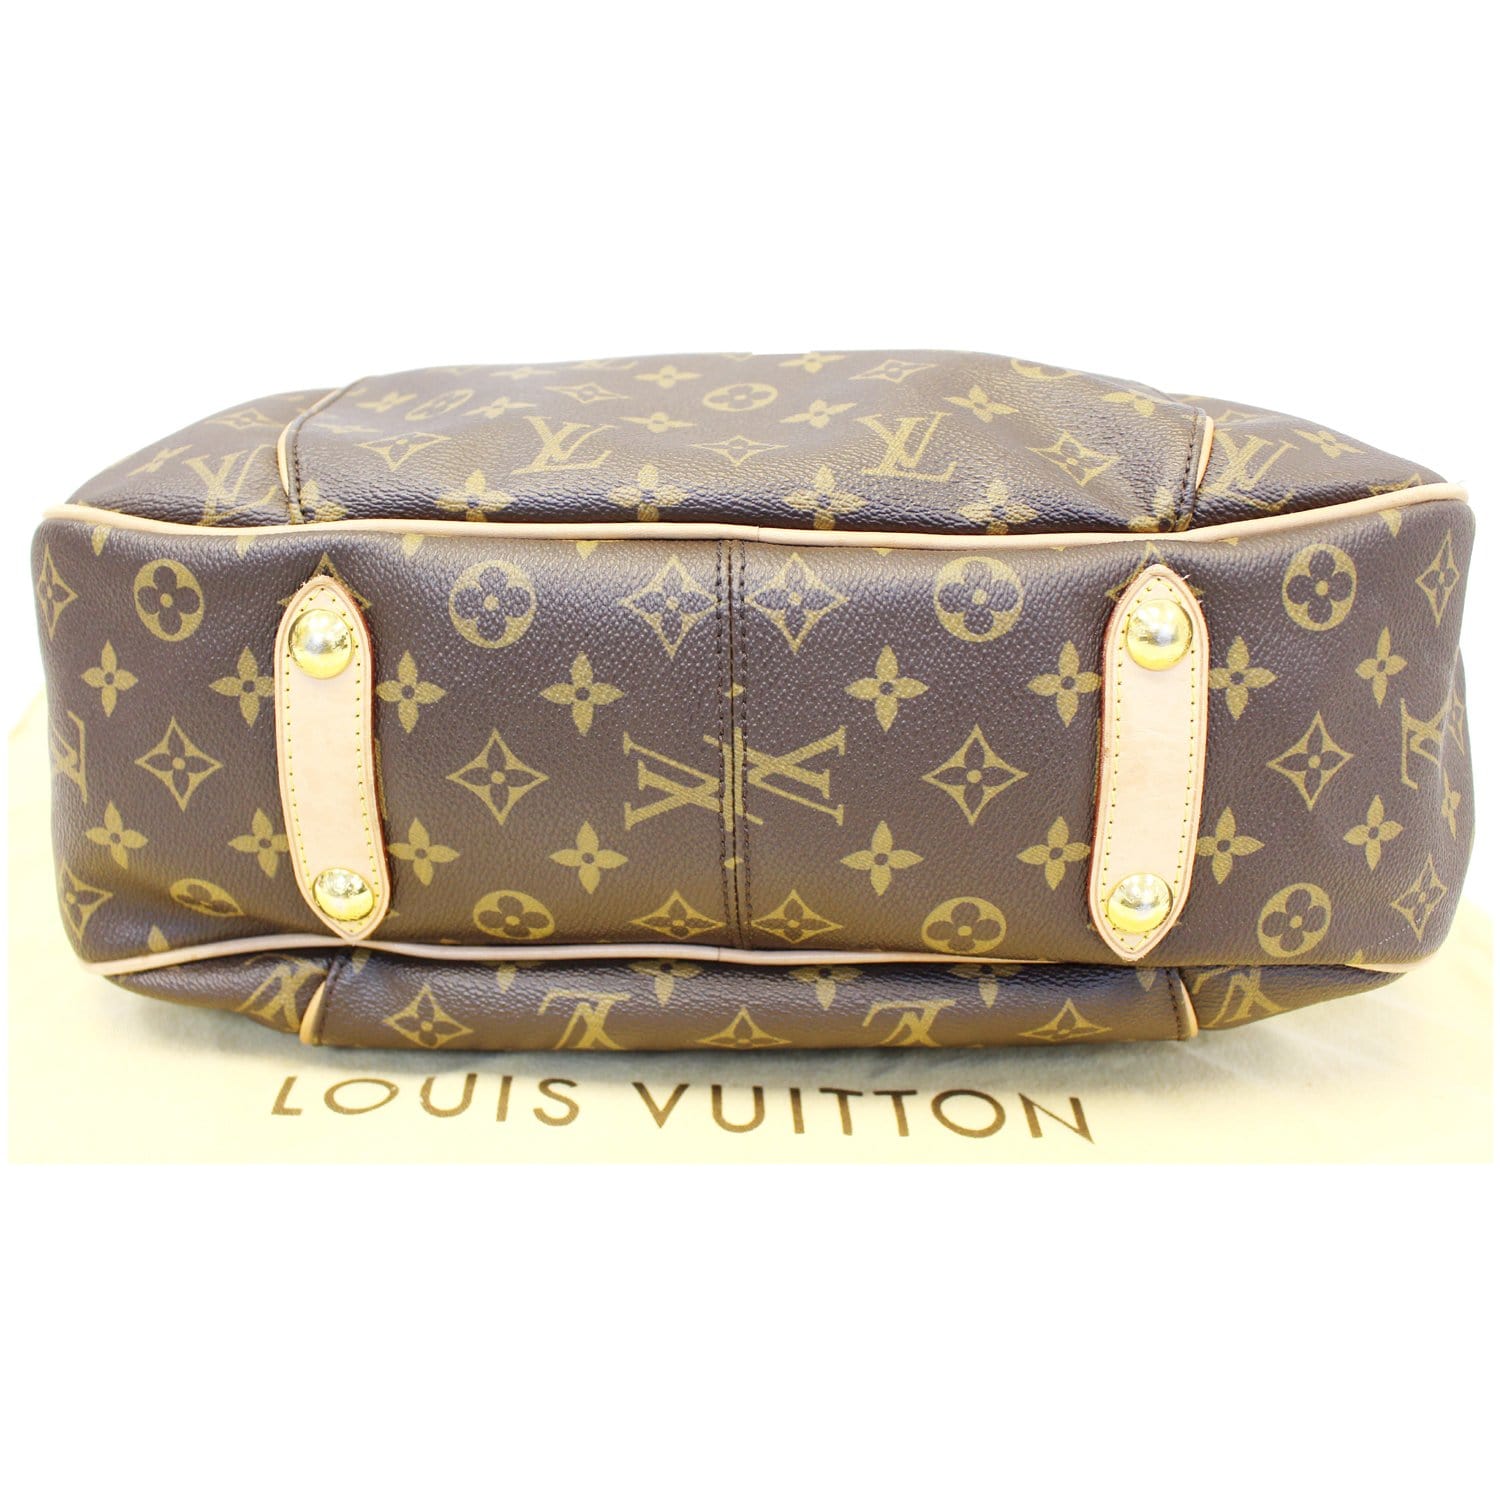 Tote Bag Organizer For Louis Vuitton Galliera PM Bag with Single Bottl